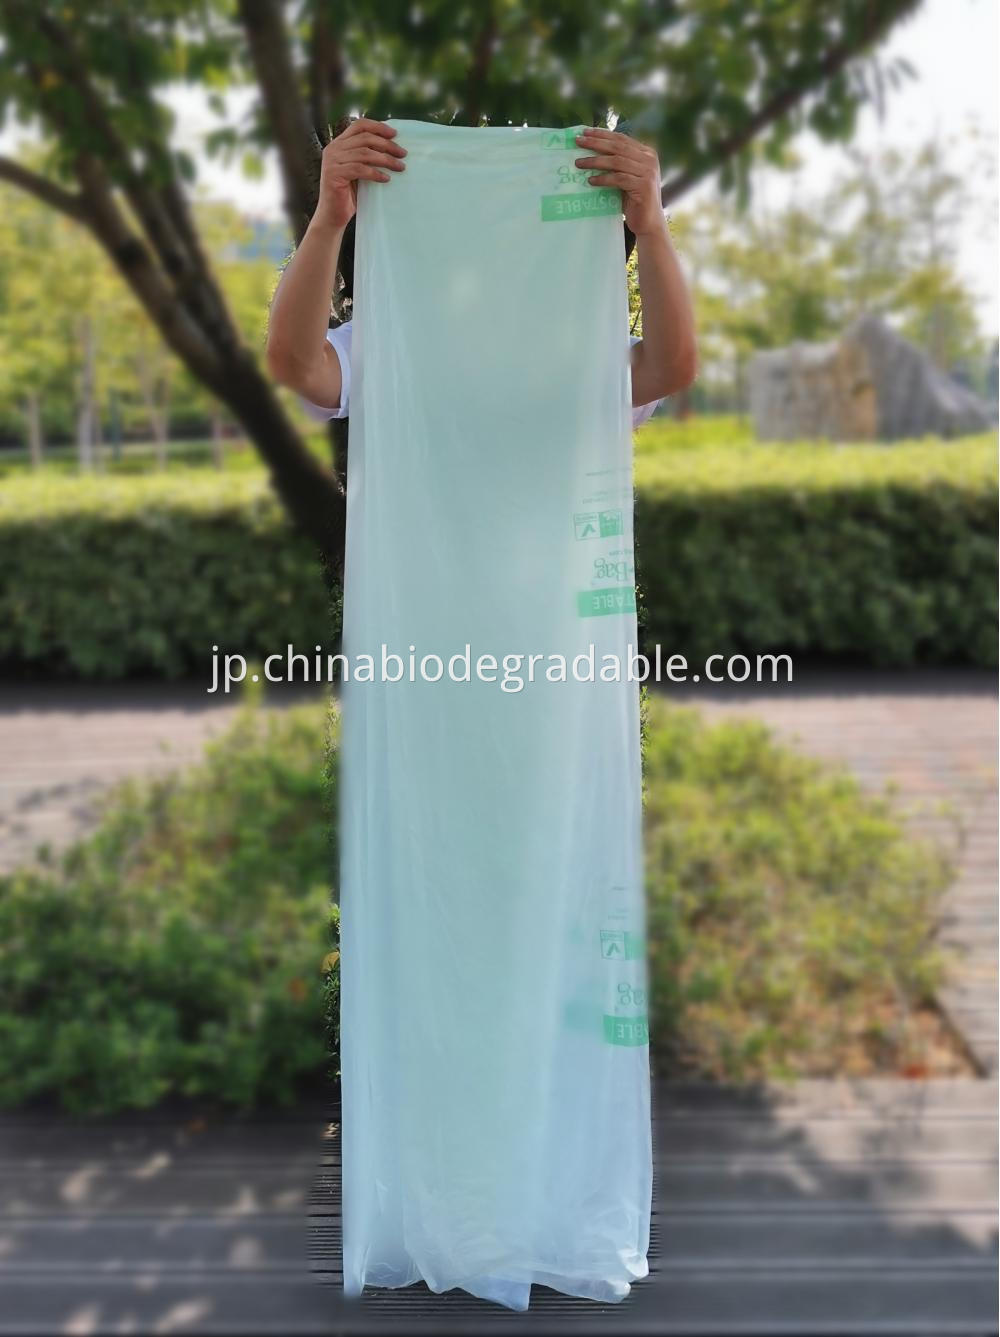 Biodegradable High Strength Biggest Bags Outdoor Trash Bags